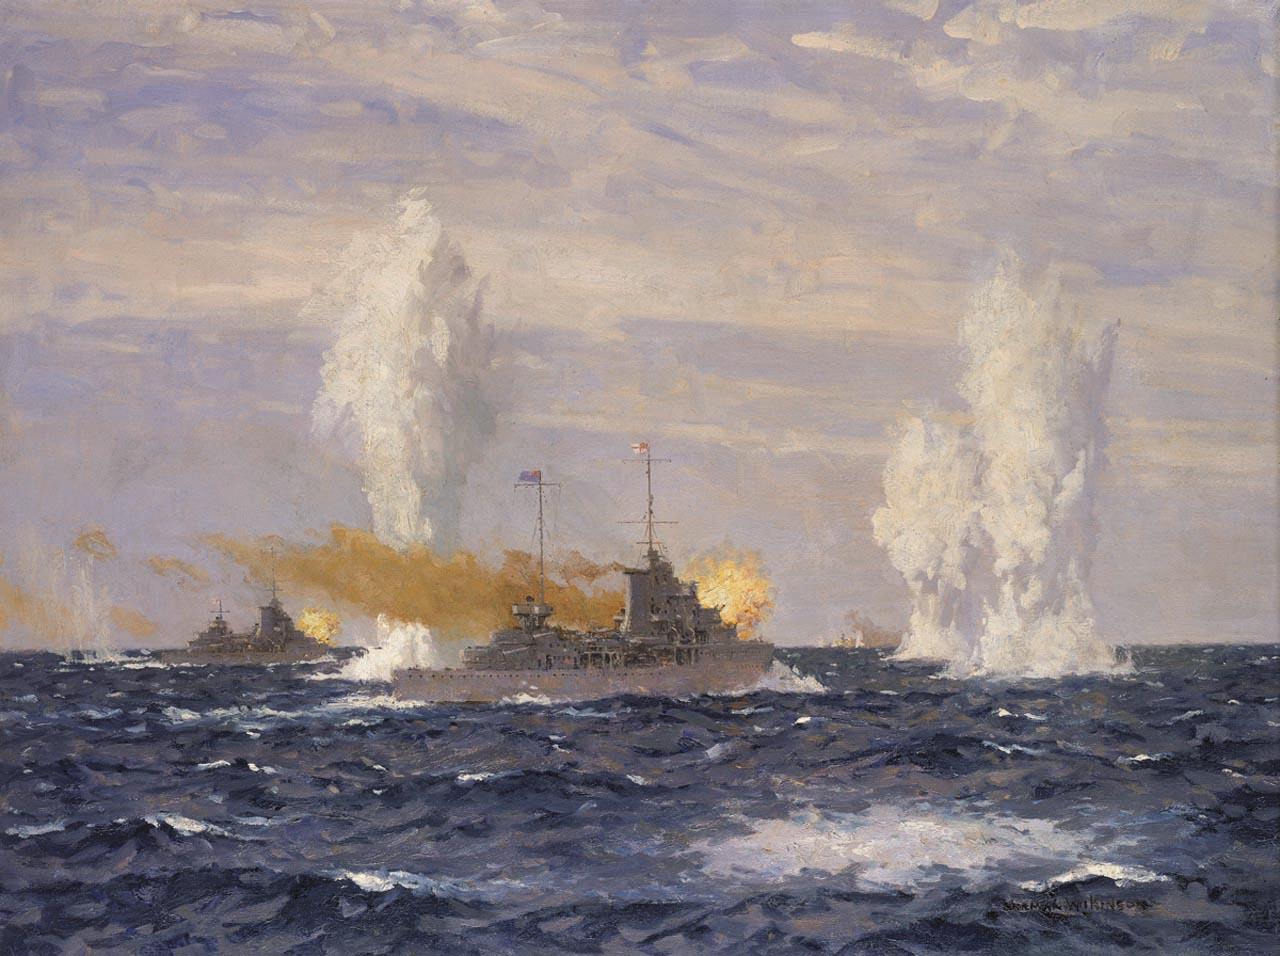 The pursuit of the 'Graf Spee' by HMS 'Ajax' and 'Achilles' [at the Battle of the River Plate, 13 December 1939]